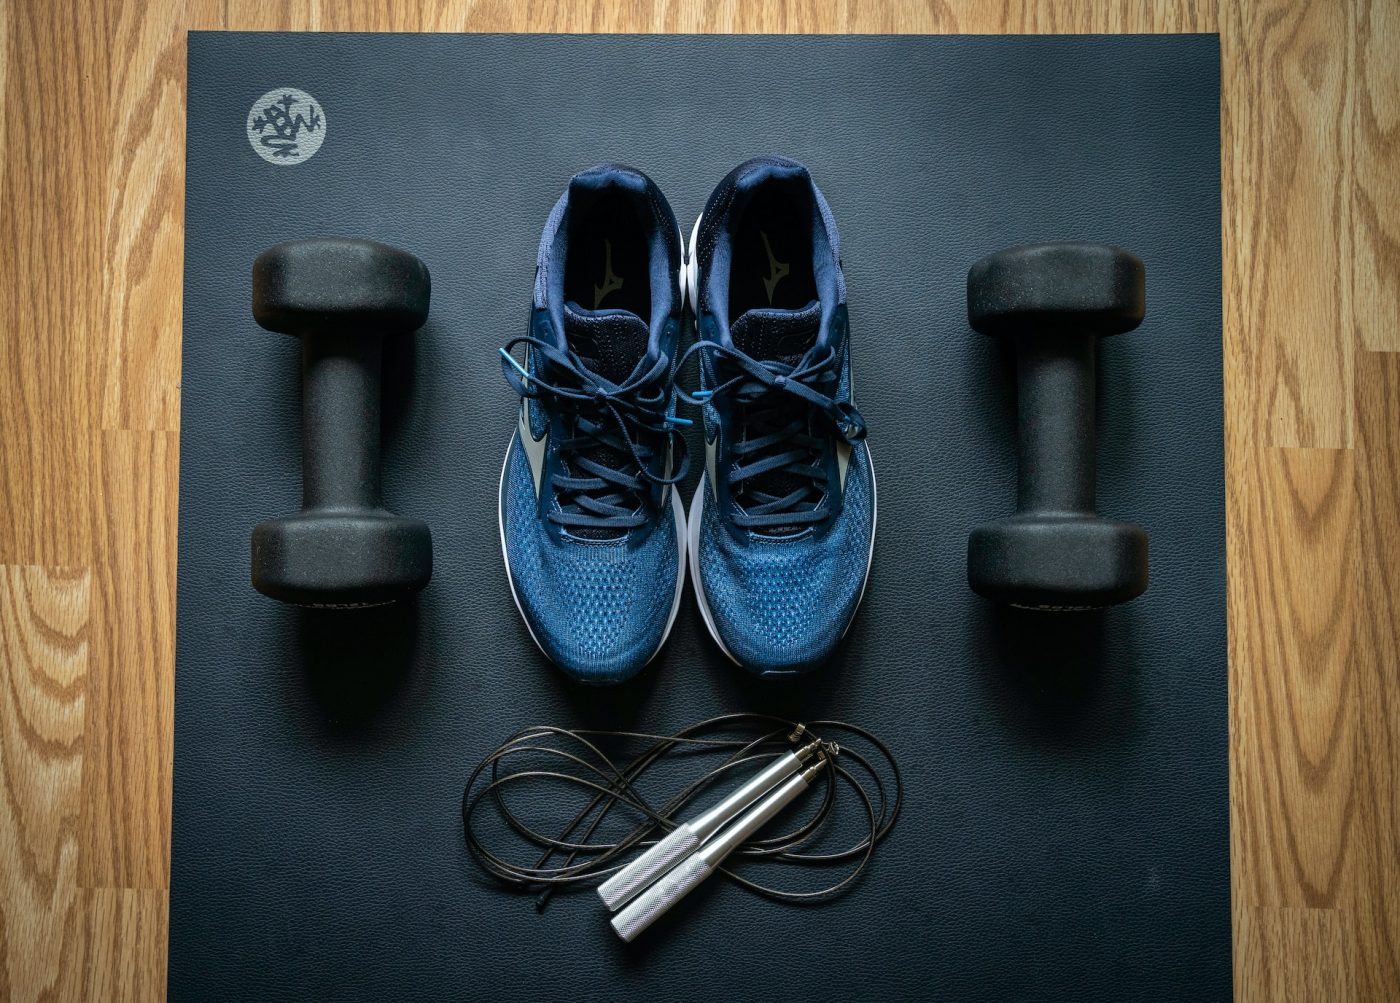 Blue sneakers and exercise equipment on a wooden floor.